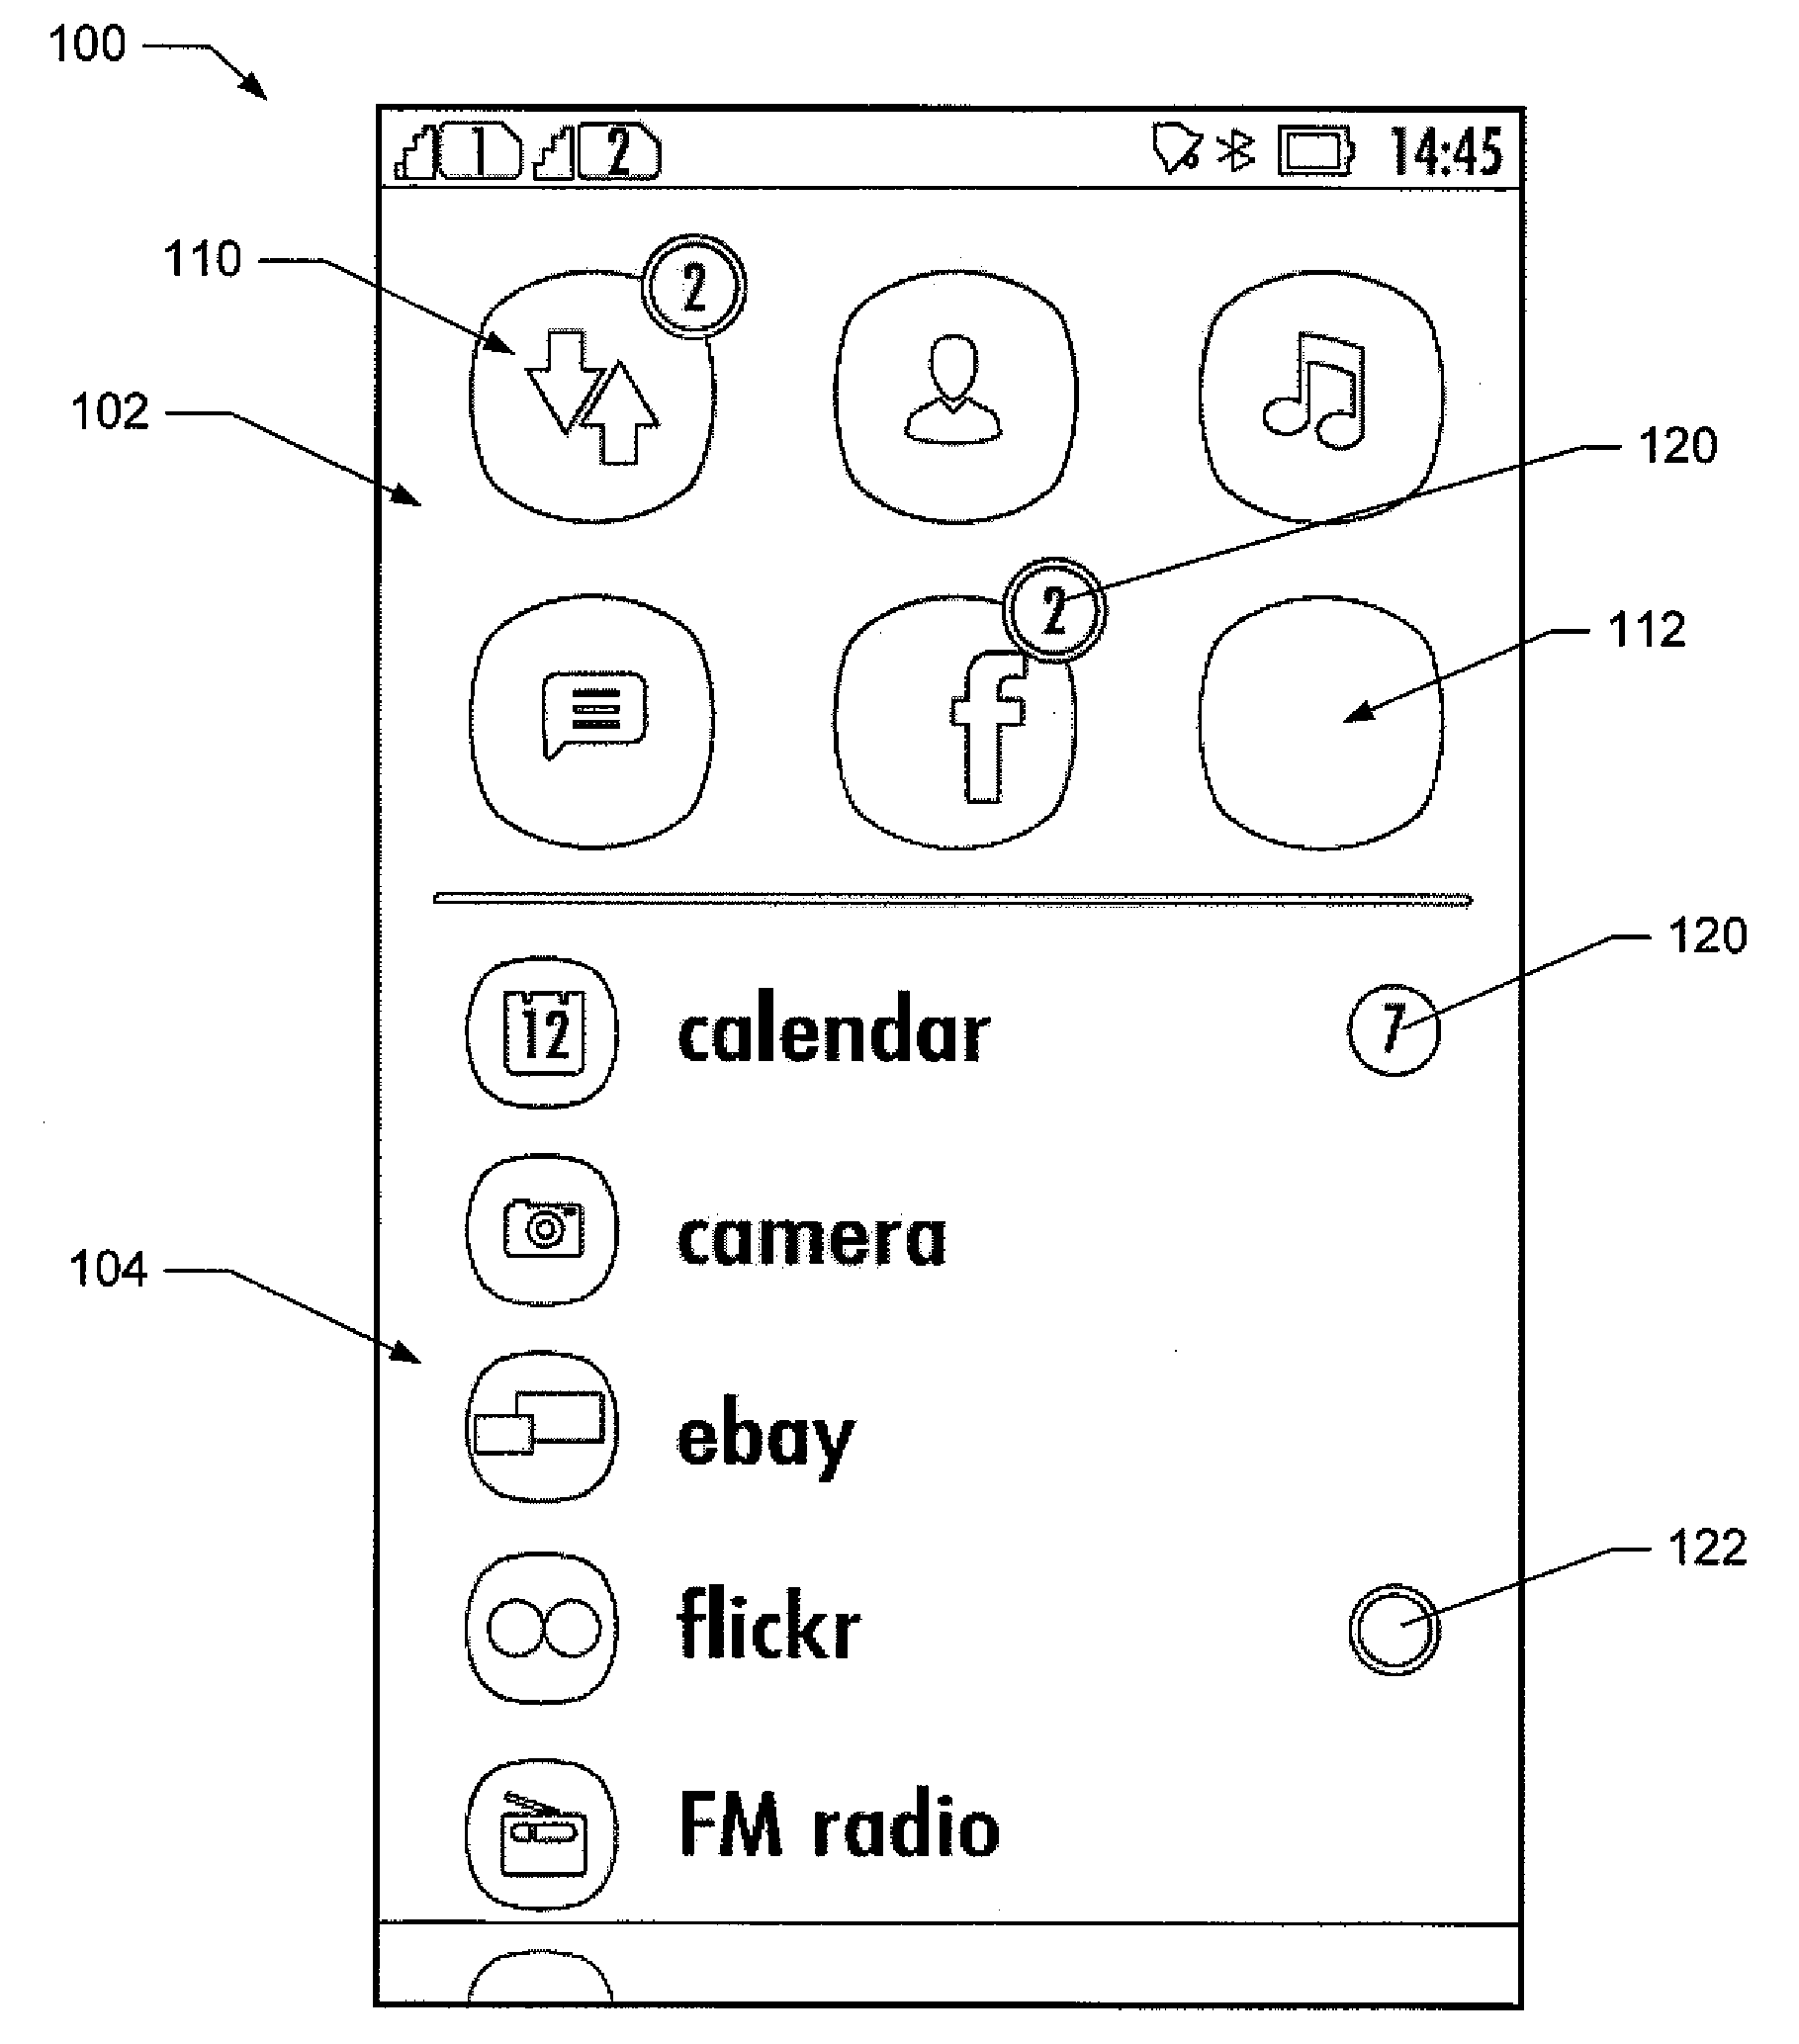 Method and apparatus for customizing a display screen of a user interface